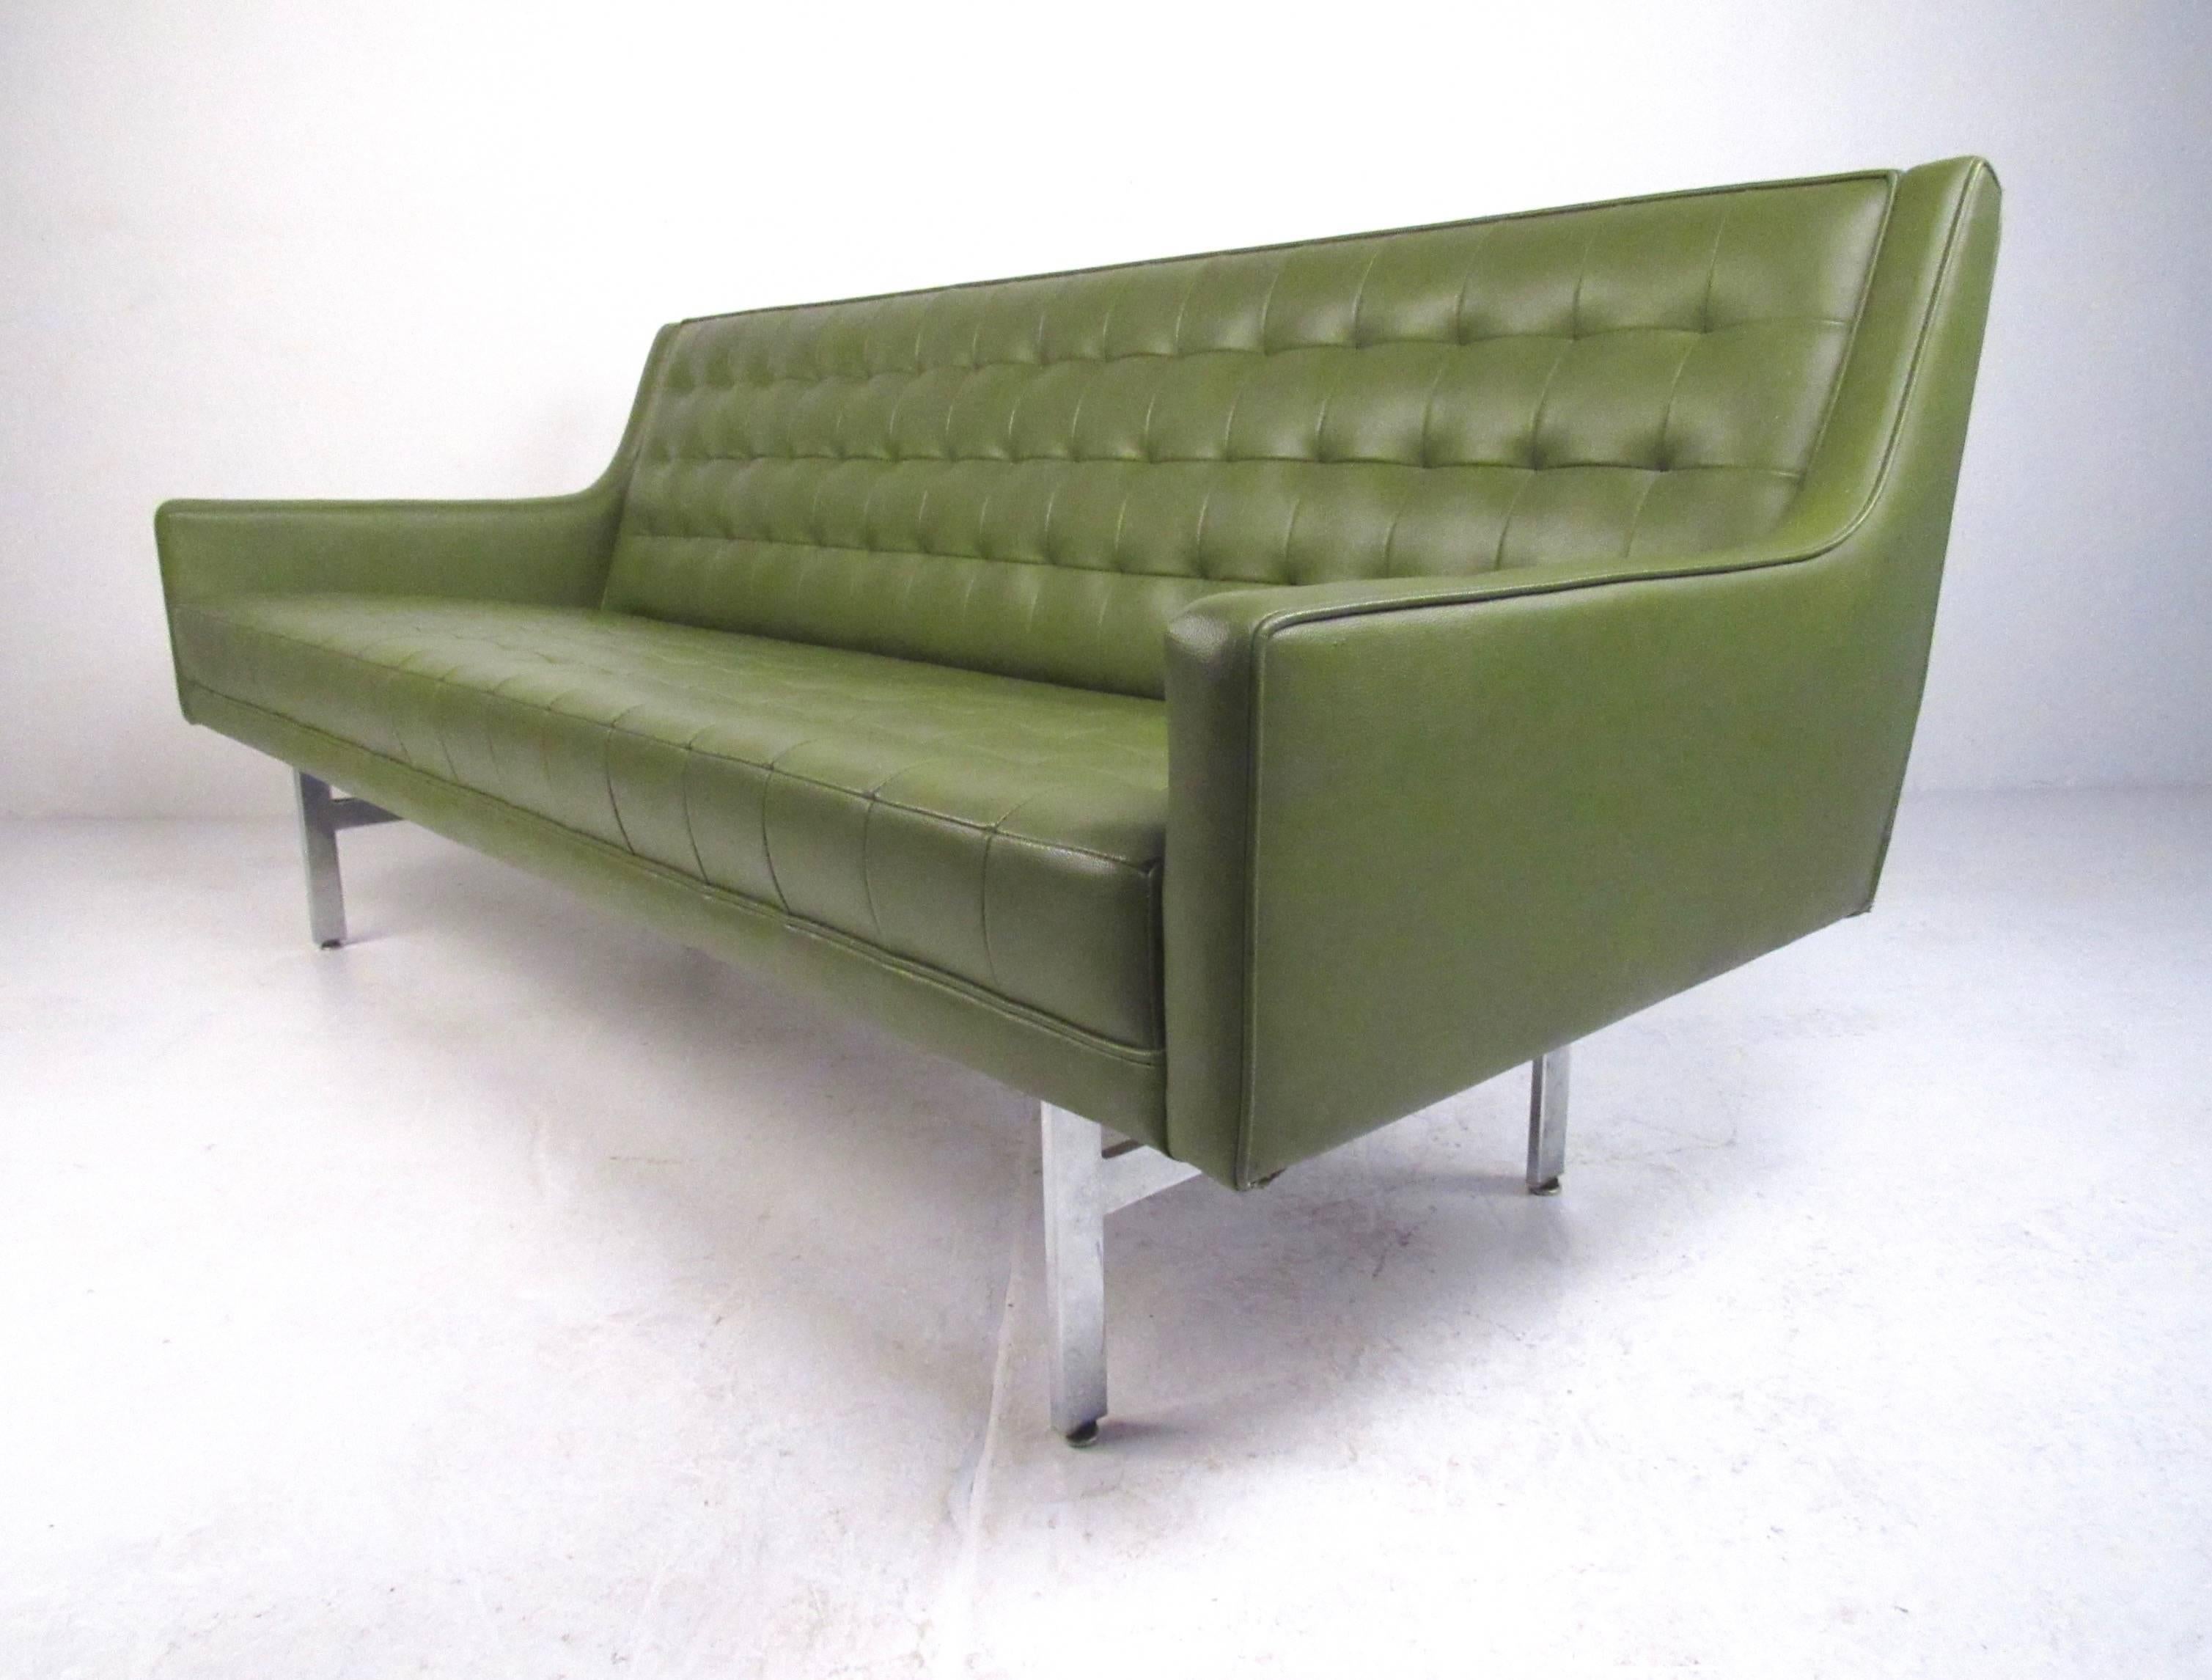 This stunning vintage sofa features eye-catching vinyl upholstery, shapely Mid-Century design, and sturdy chrome legs. Unique tufted upholstery makes this long green sofa an impressive retro modern addition to any interior. Please confirm item